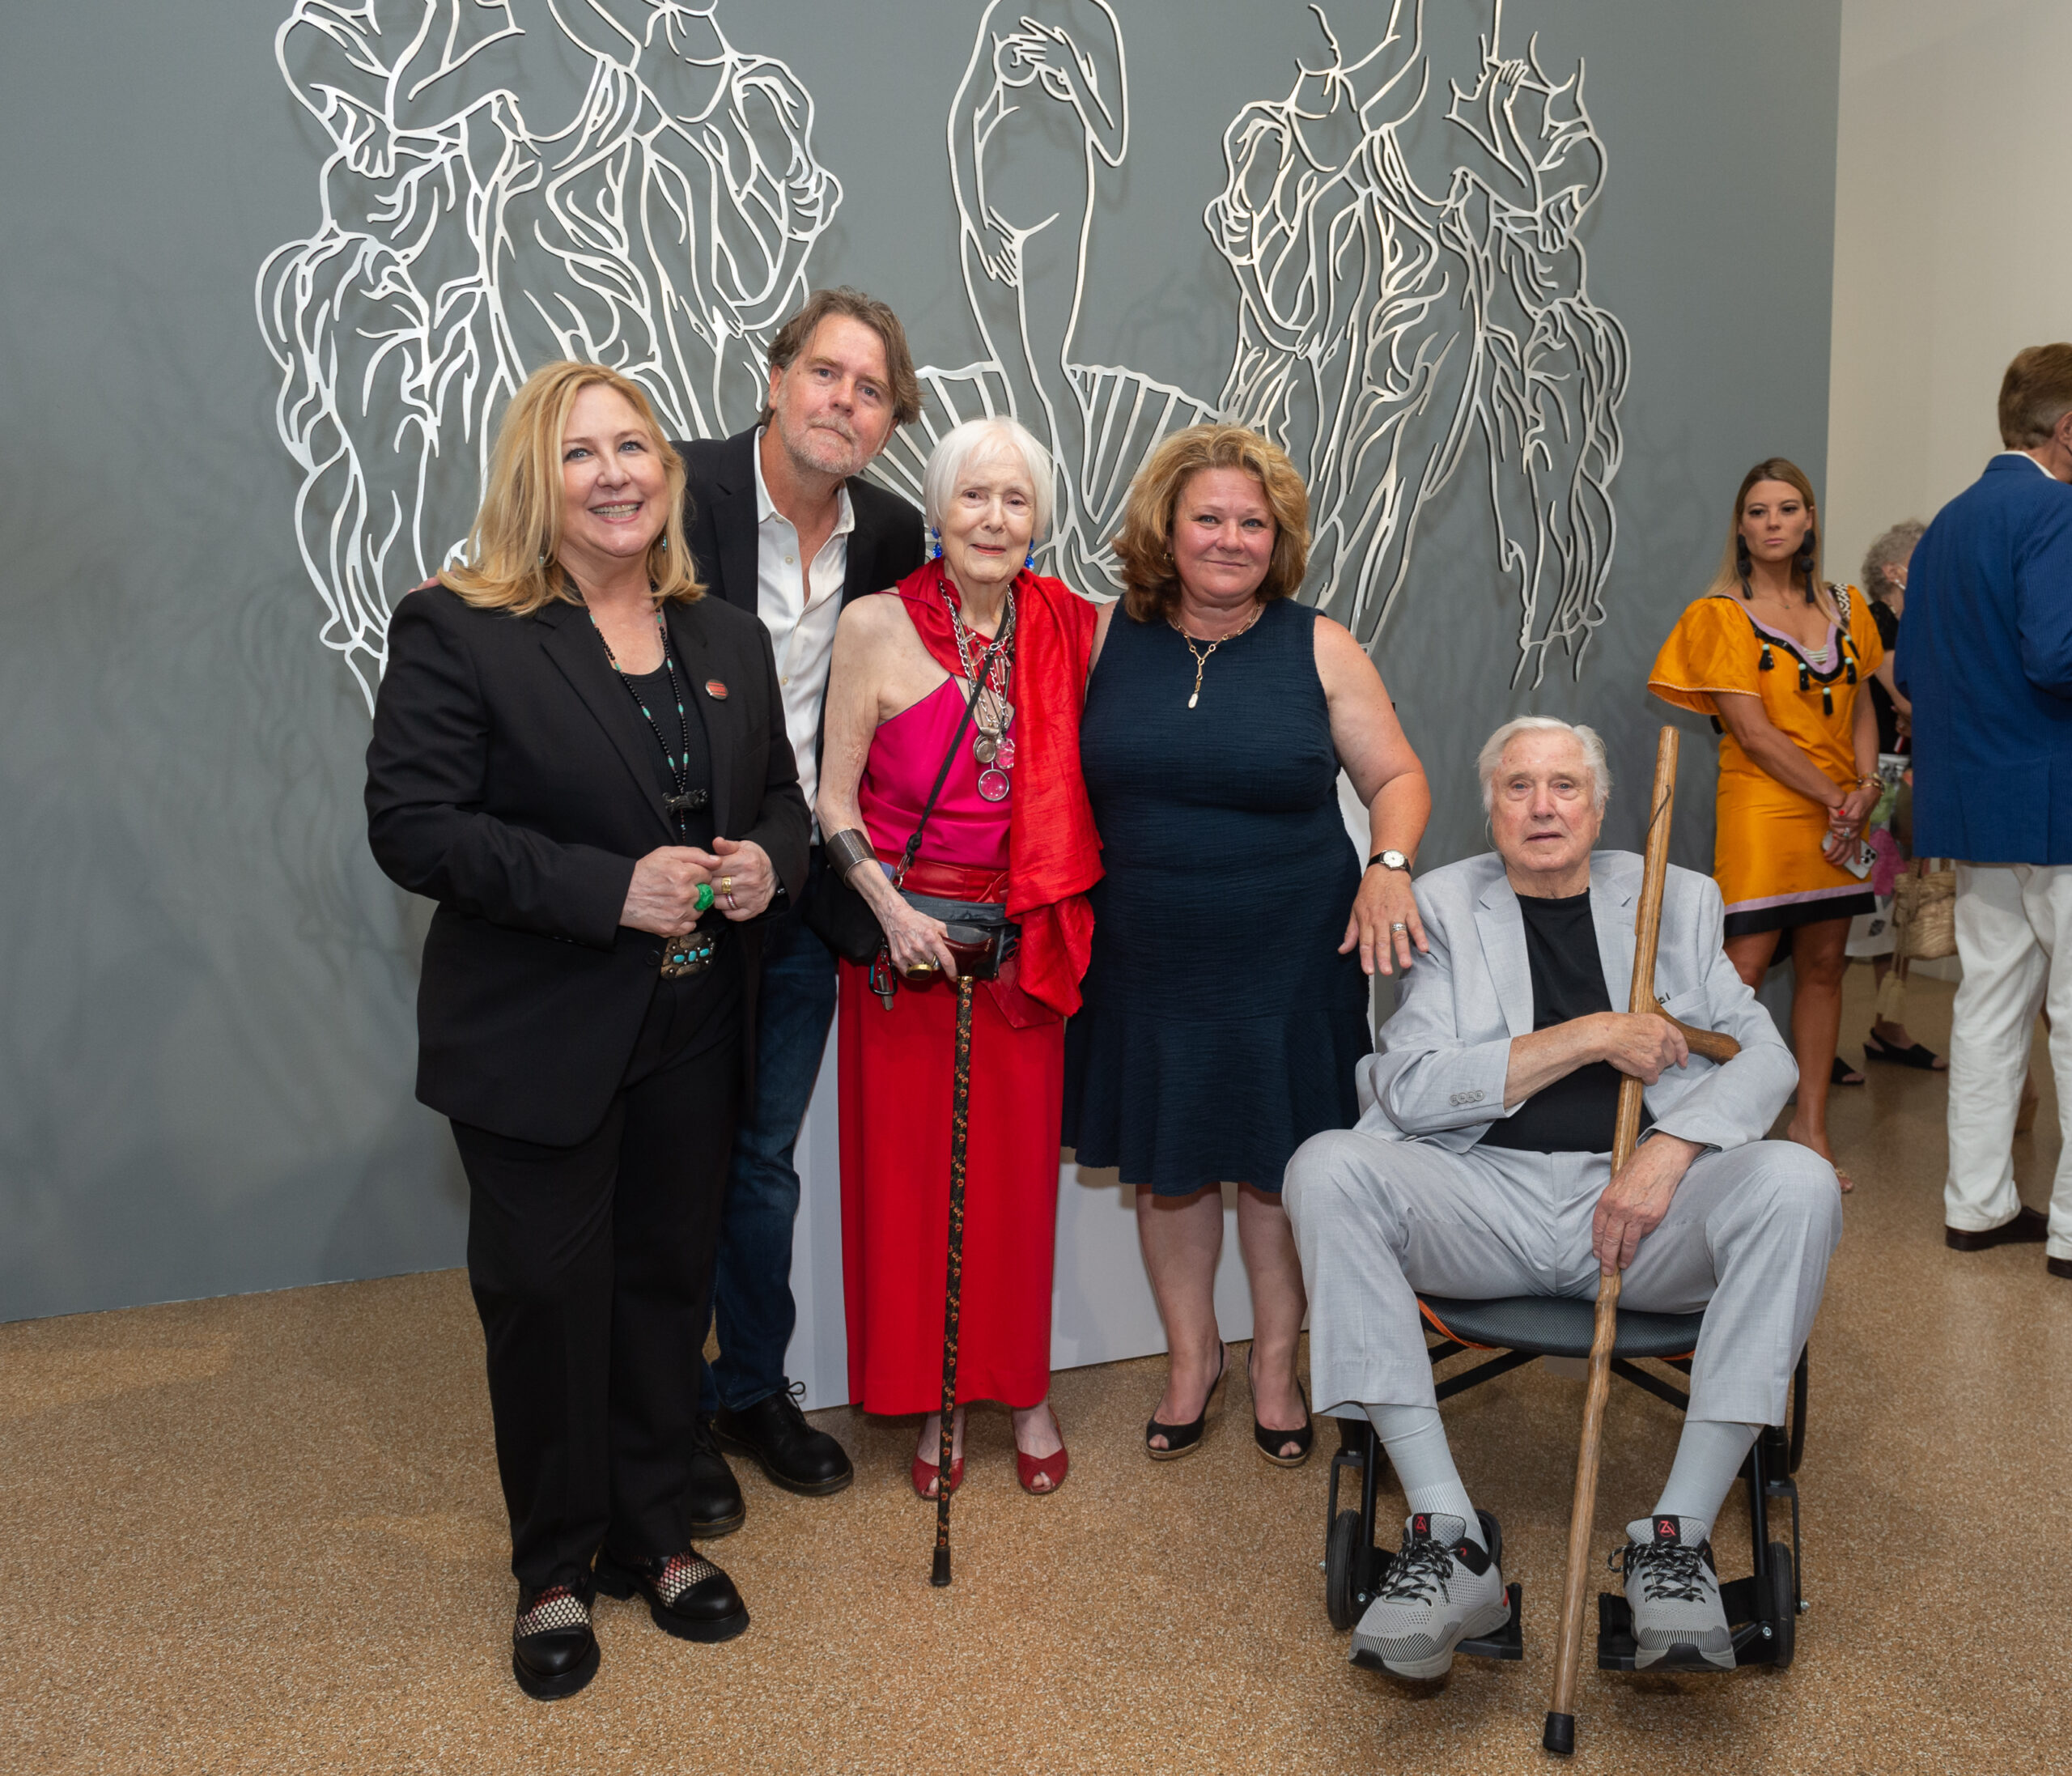 Artist Deborah Buck, SAC's executive director Tom Dunn, artist Strong-Cuevas, curator Christina Mossaides Strassfield and artist Hal Buckner at the opening of 